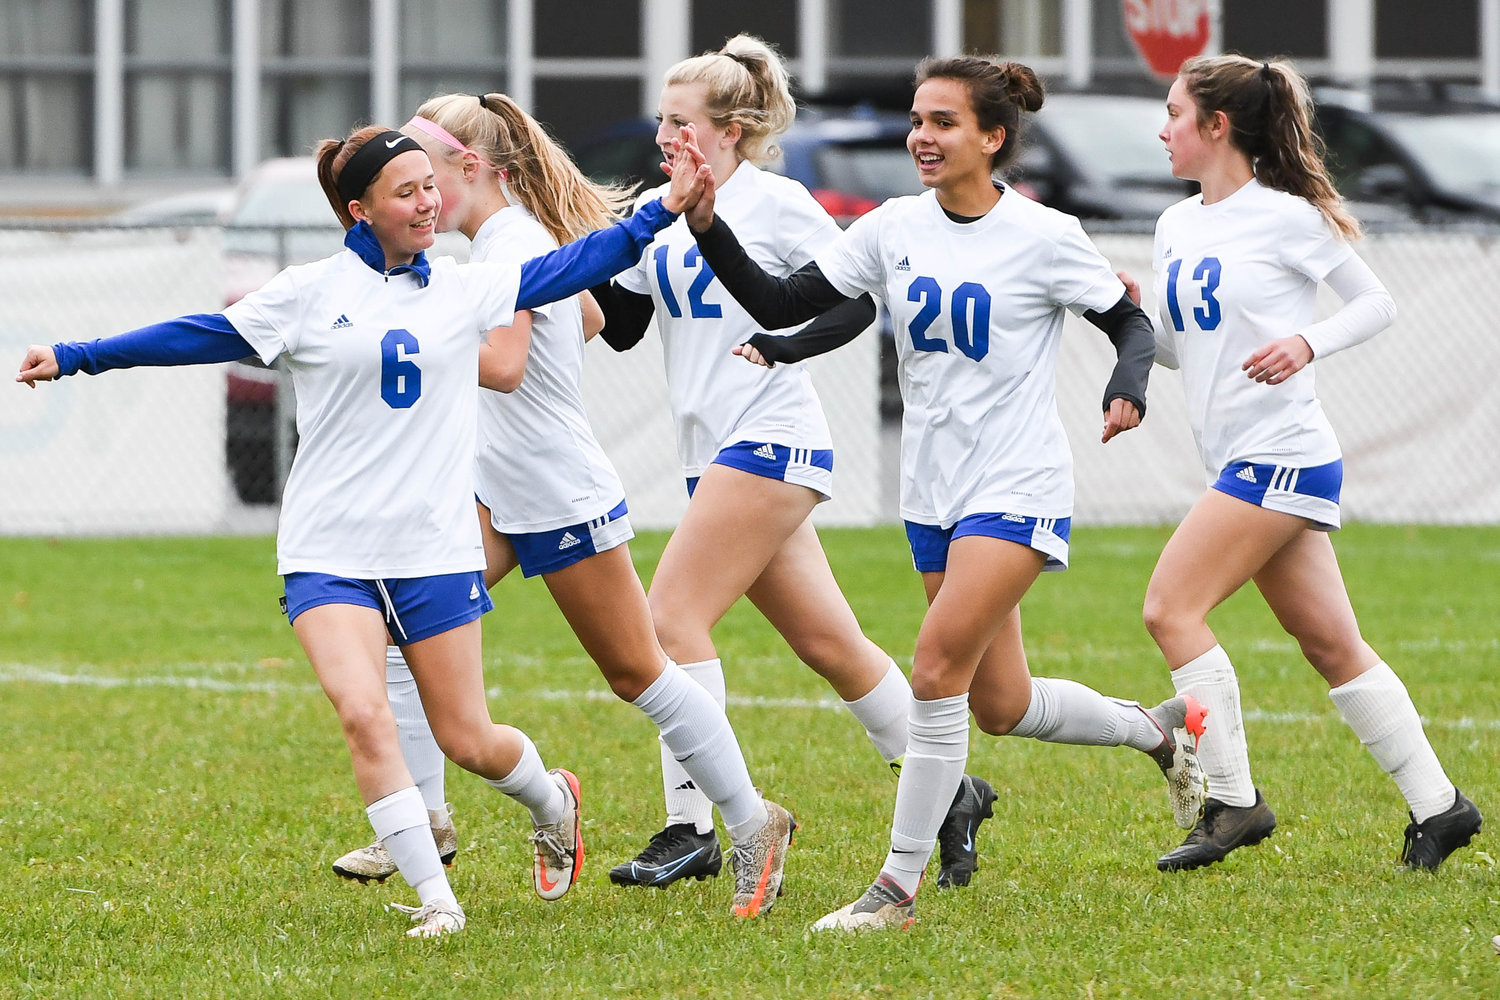 Dolgeville players celebrate a first half goal against Westmoreland on Tuesday in the opening round of the Section III Class C playoffs. Jakyra Miller (20) scored on an assist from Ally Comstock to take the lead. The goal was enough for the Blue Devils, who won 1-0 to advance. Among the players celebrating with her are Sidney Gillogly, Gianna Lyon and Reece Lamphere.